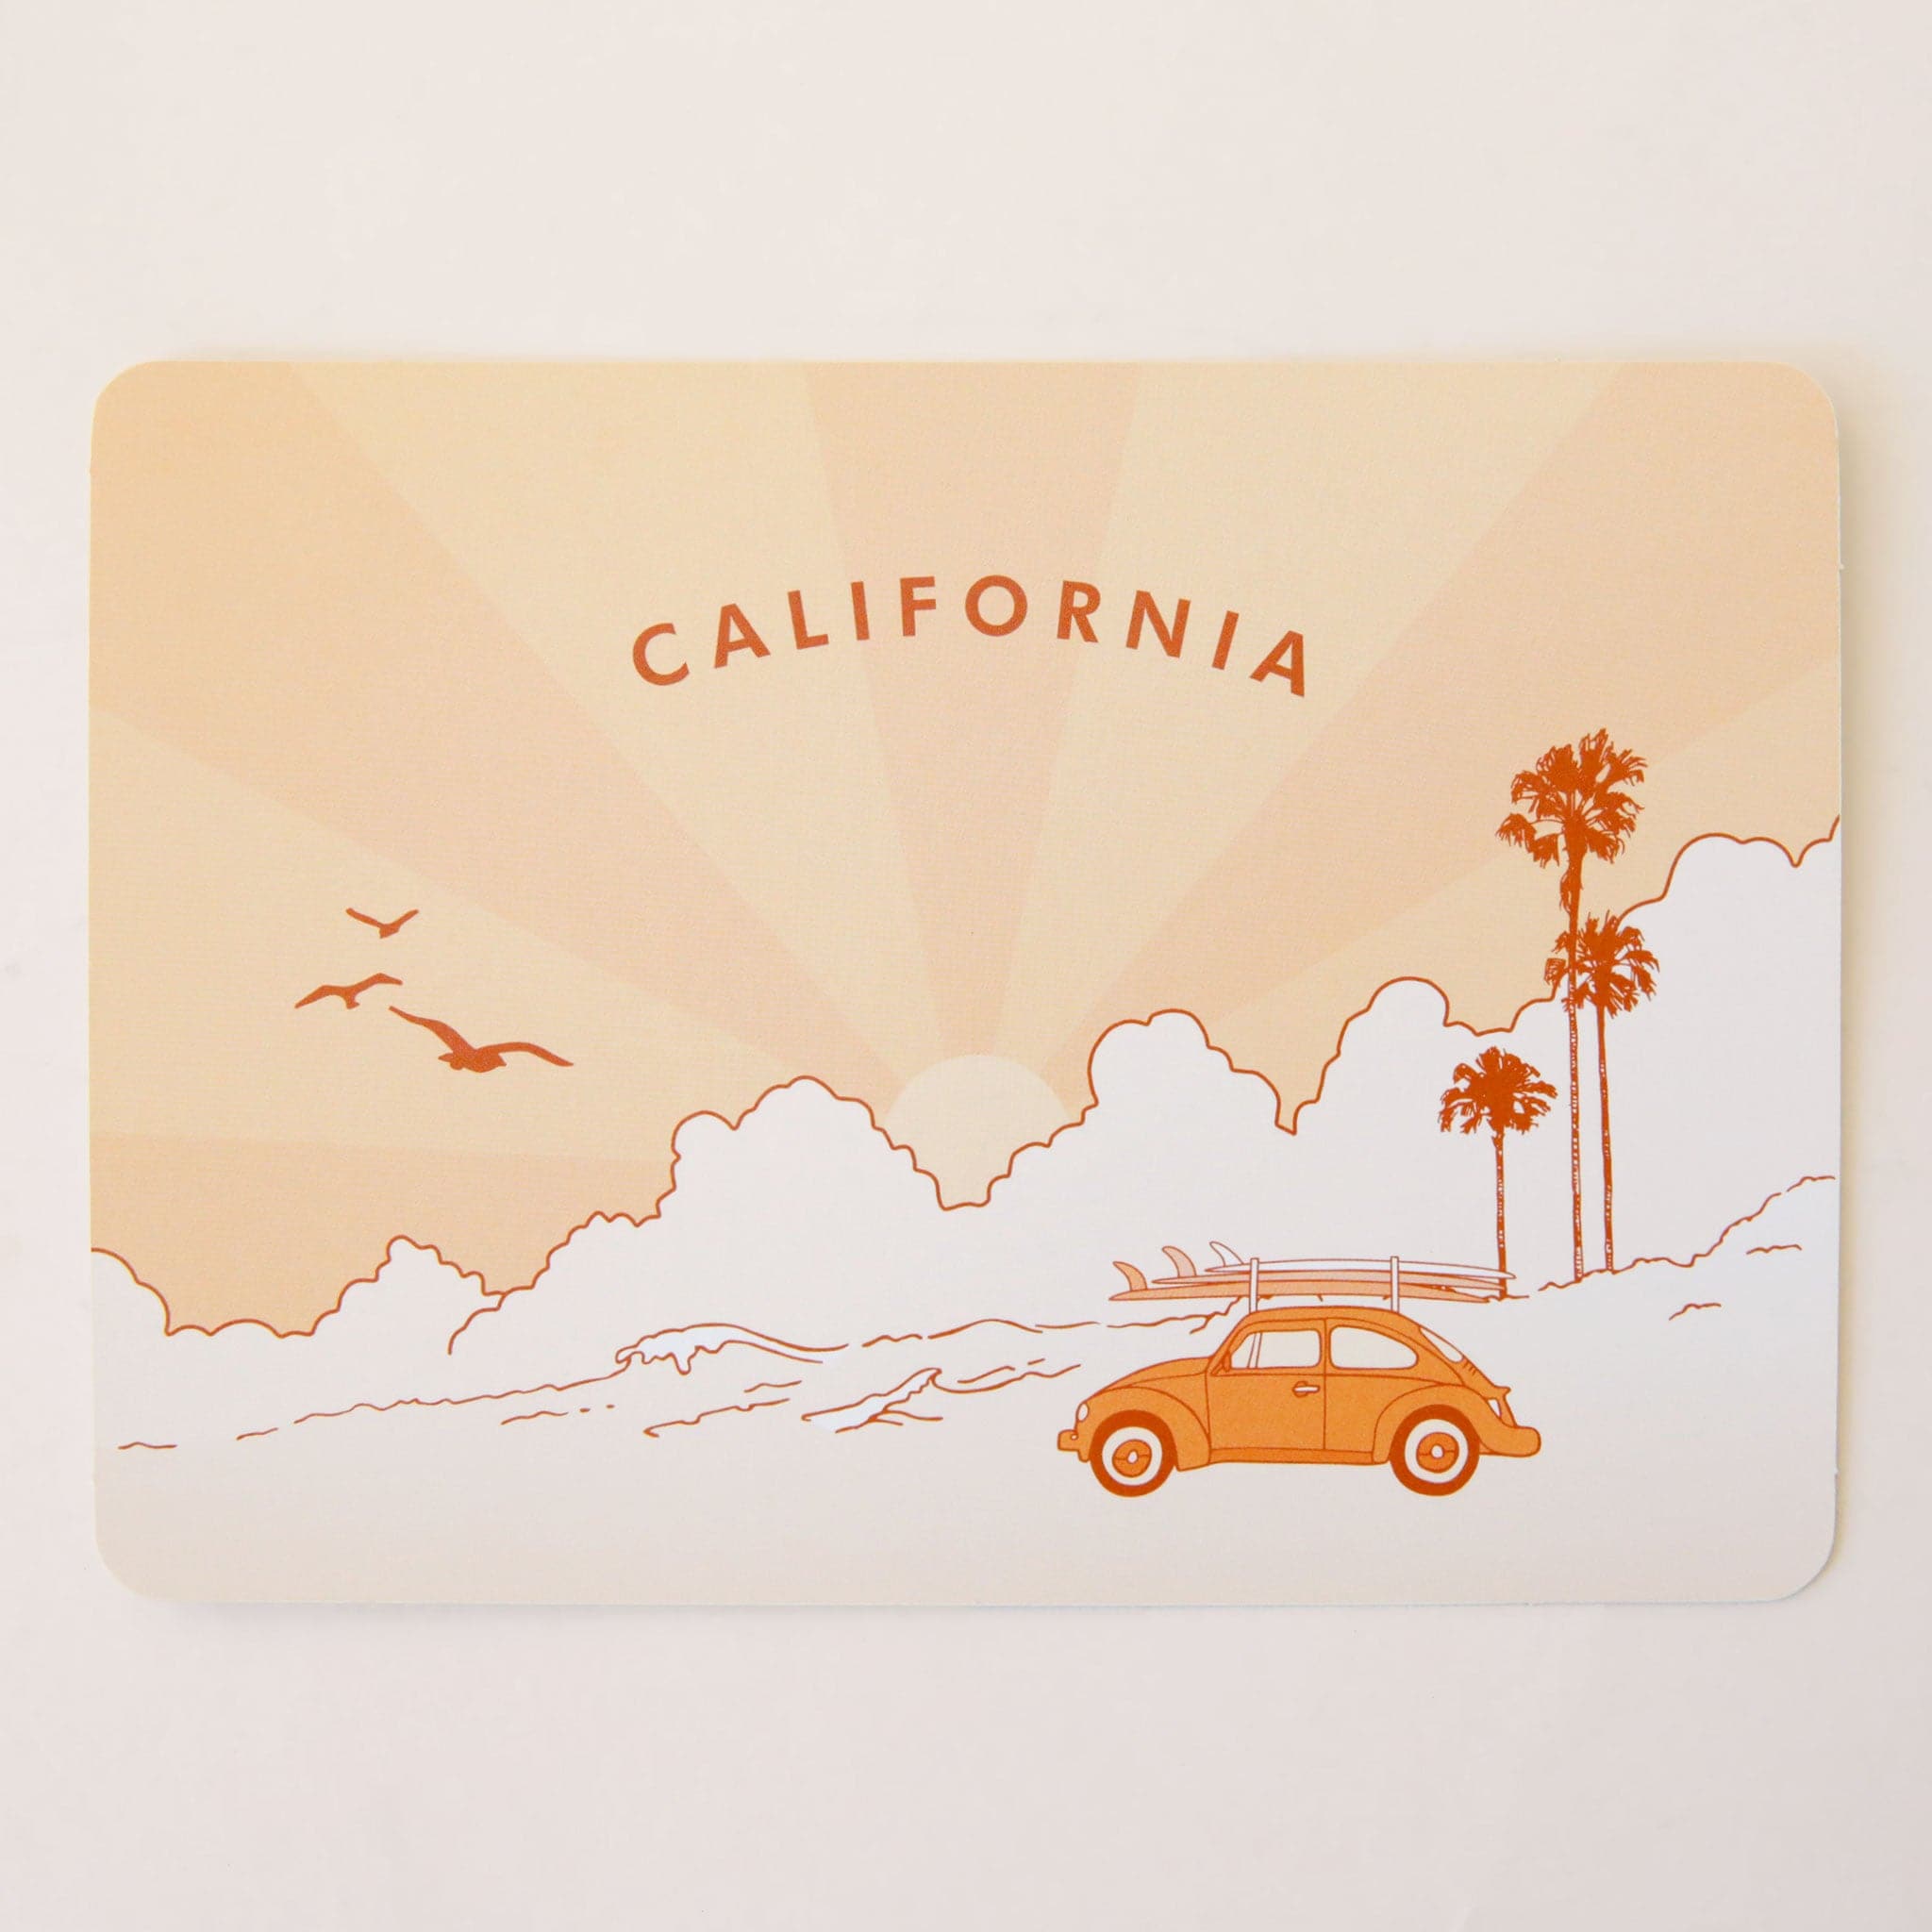 Peach postcard with a palm tree and a mustard VW bug with a surfboard. The text on the top says, "California".